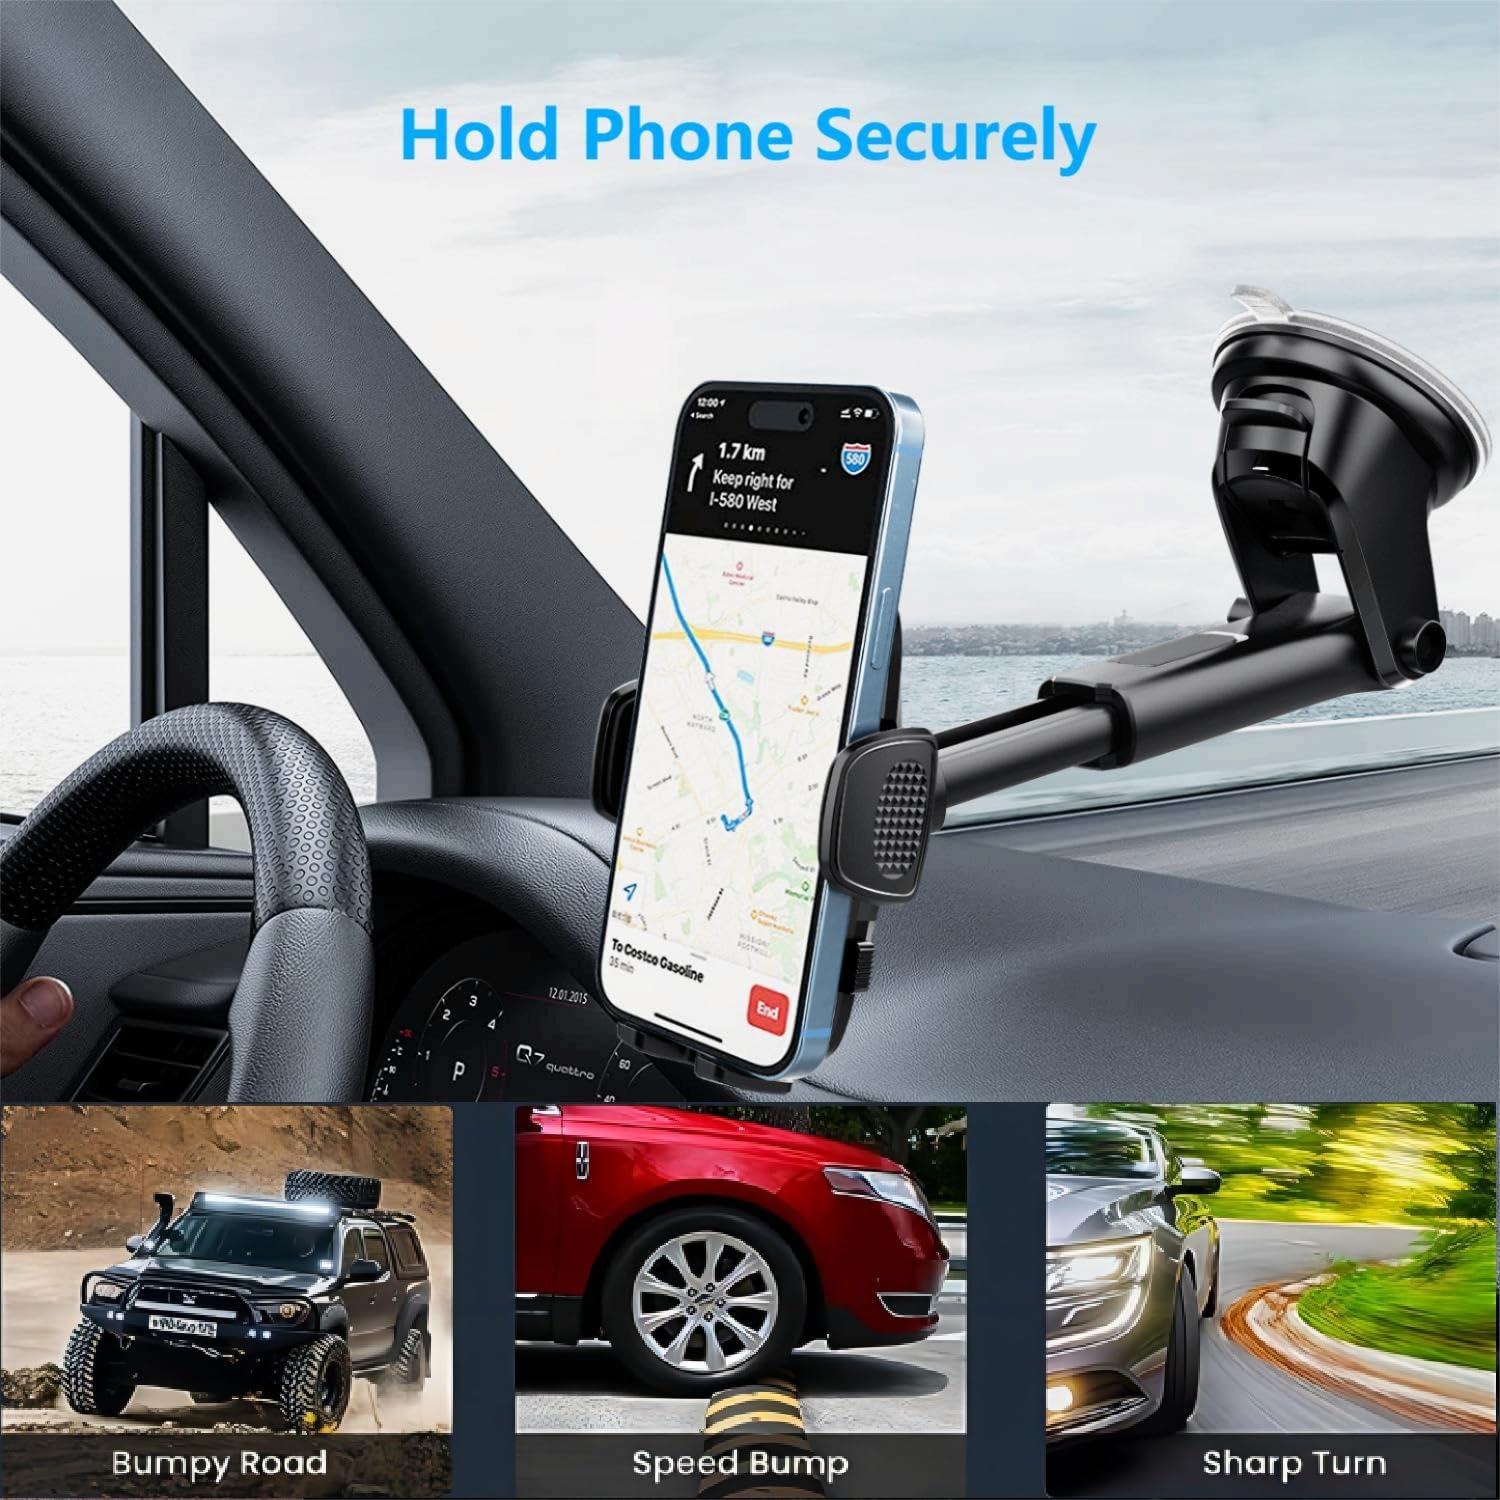 Phone Dash Mount for Car, Phone Holder for Car Windshield Dashboard Window, Gun Mount Hands Free Universal Automobile Cell Phone Holder Fit for iPhone Smartphones